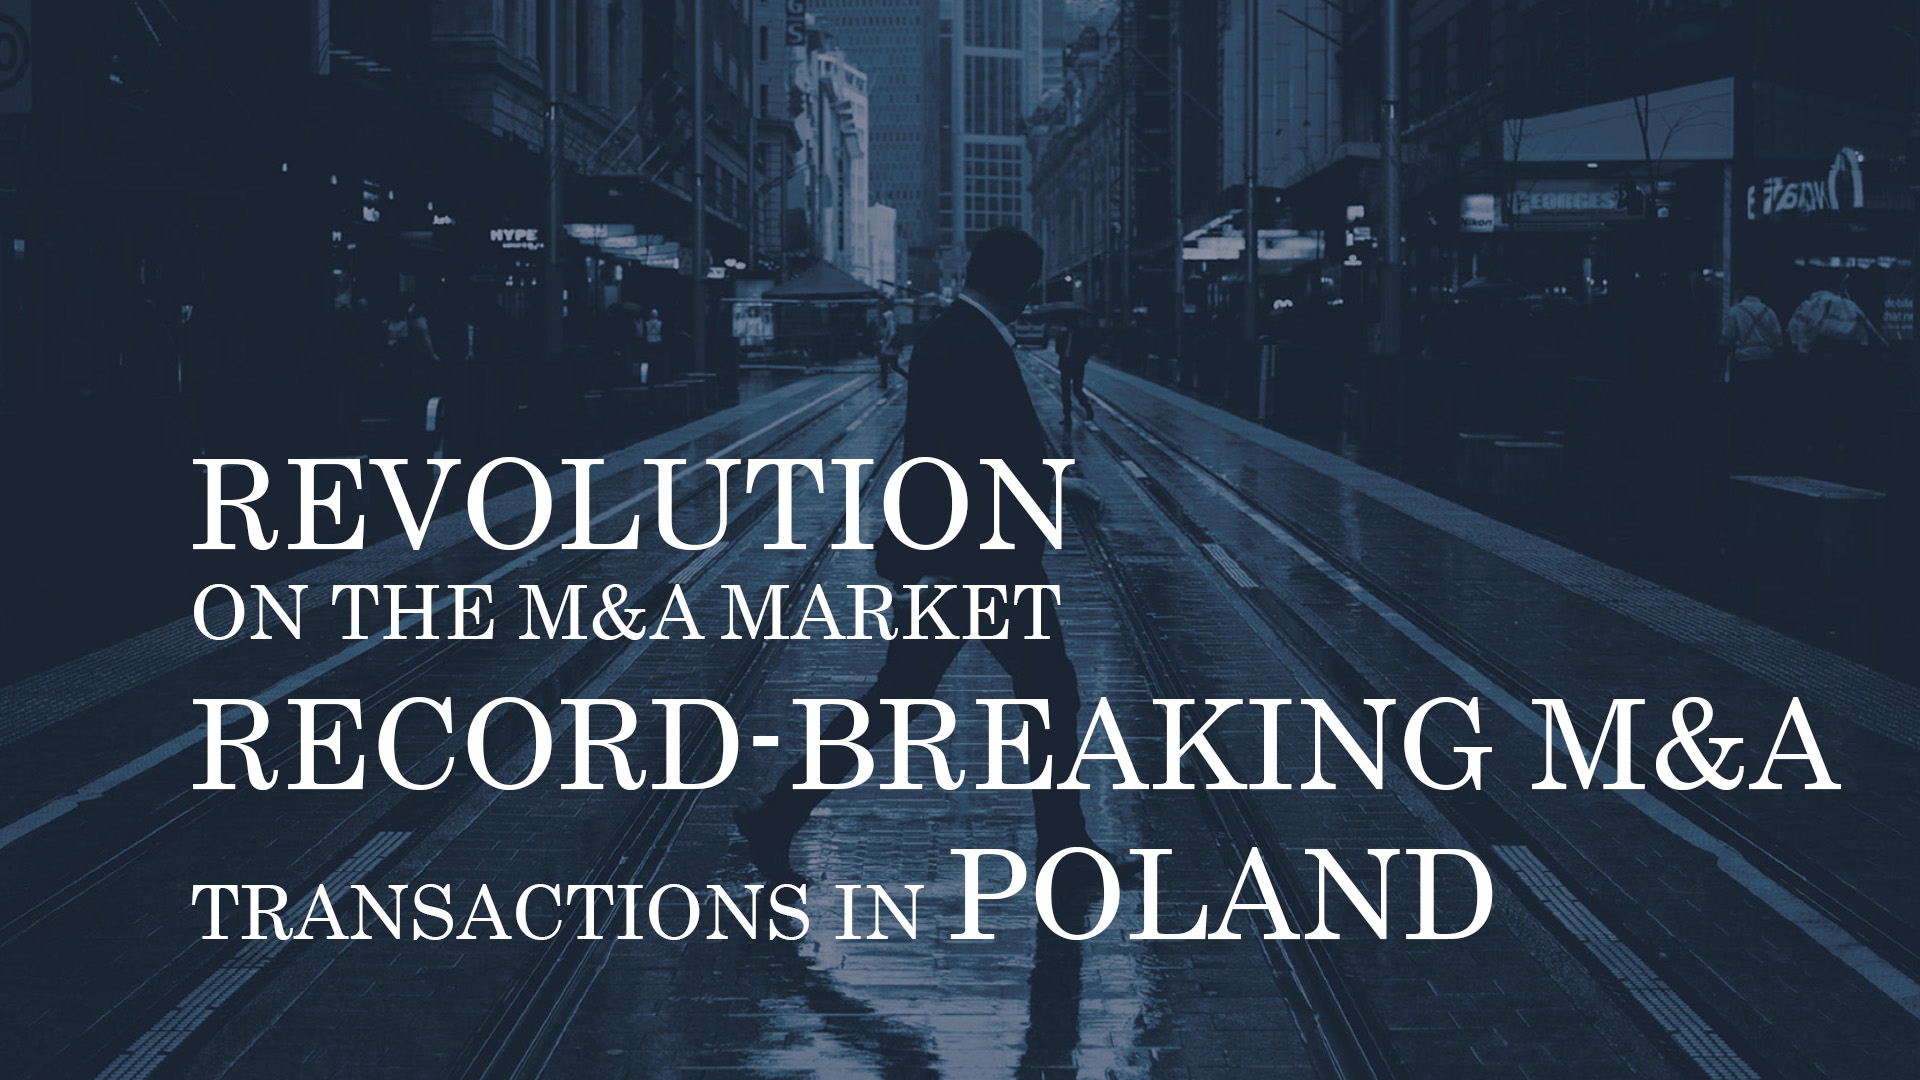 REVOLUTION ON THE MERGERS & ACQUISITIONS MARKET – RECORD-BREAKING M&A TRANSACTIONS IN POLAND